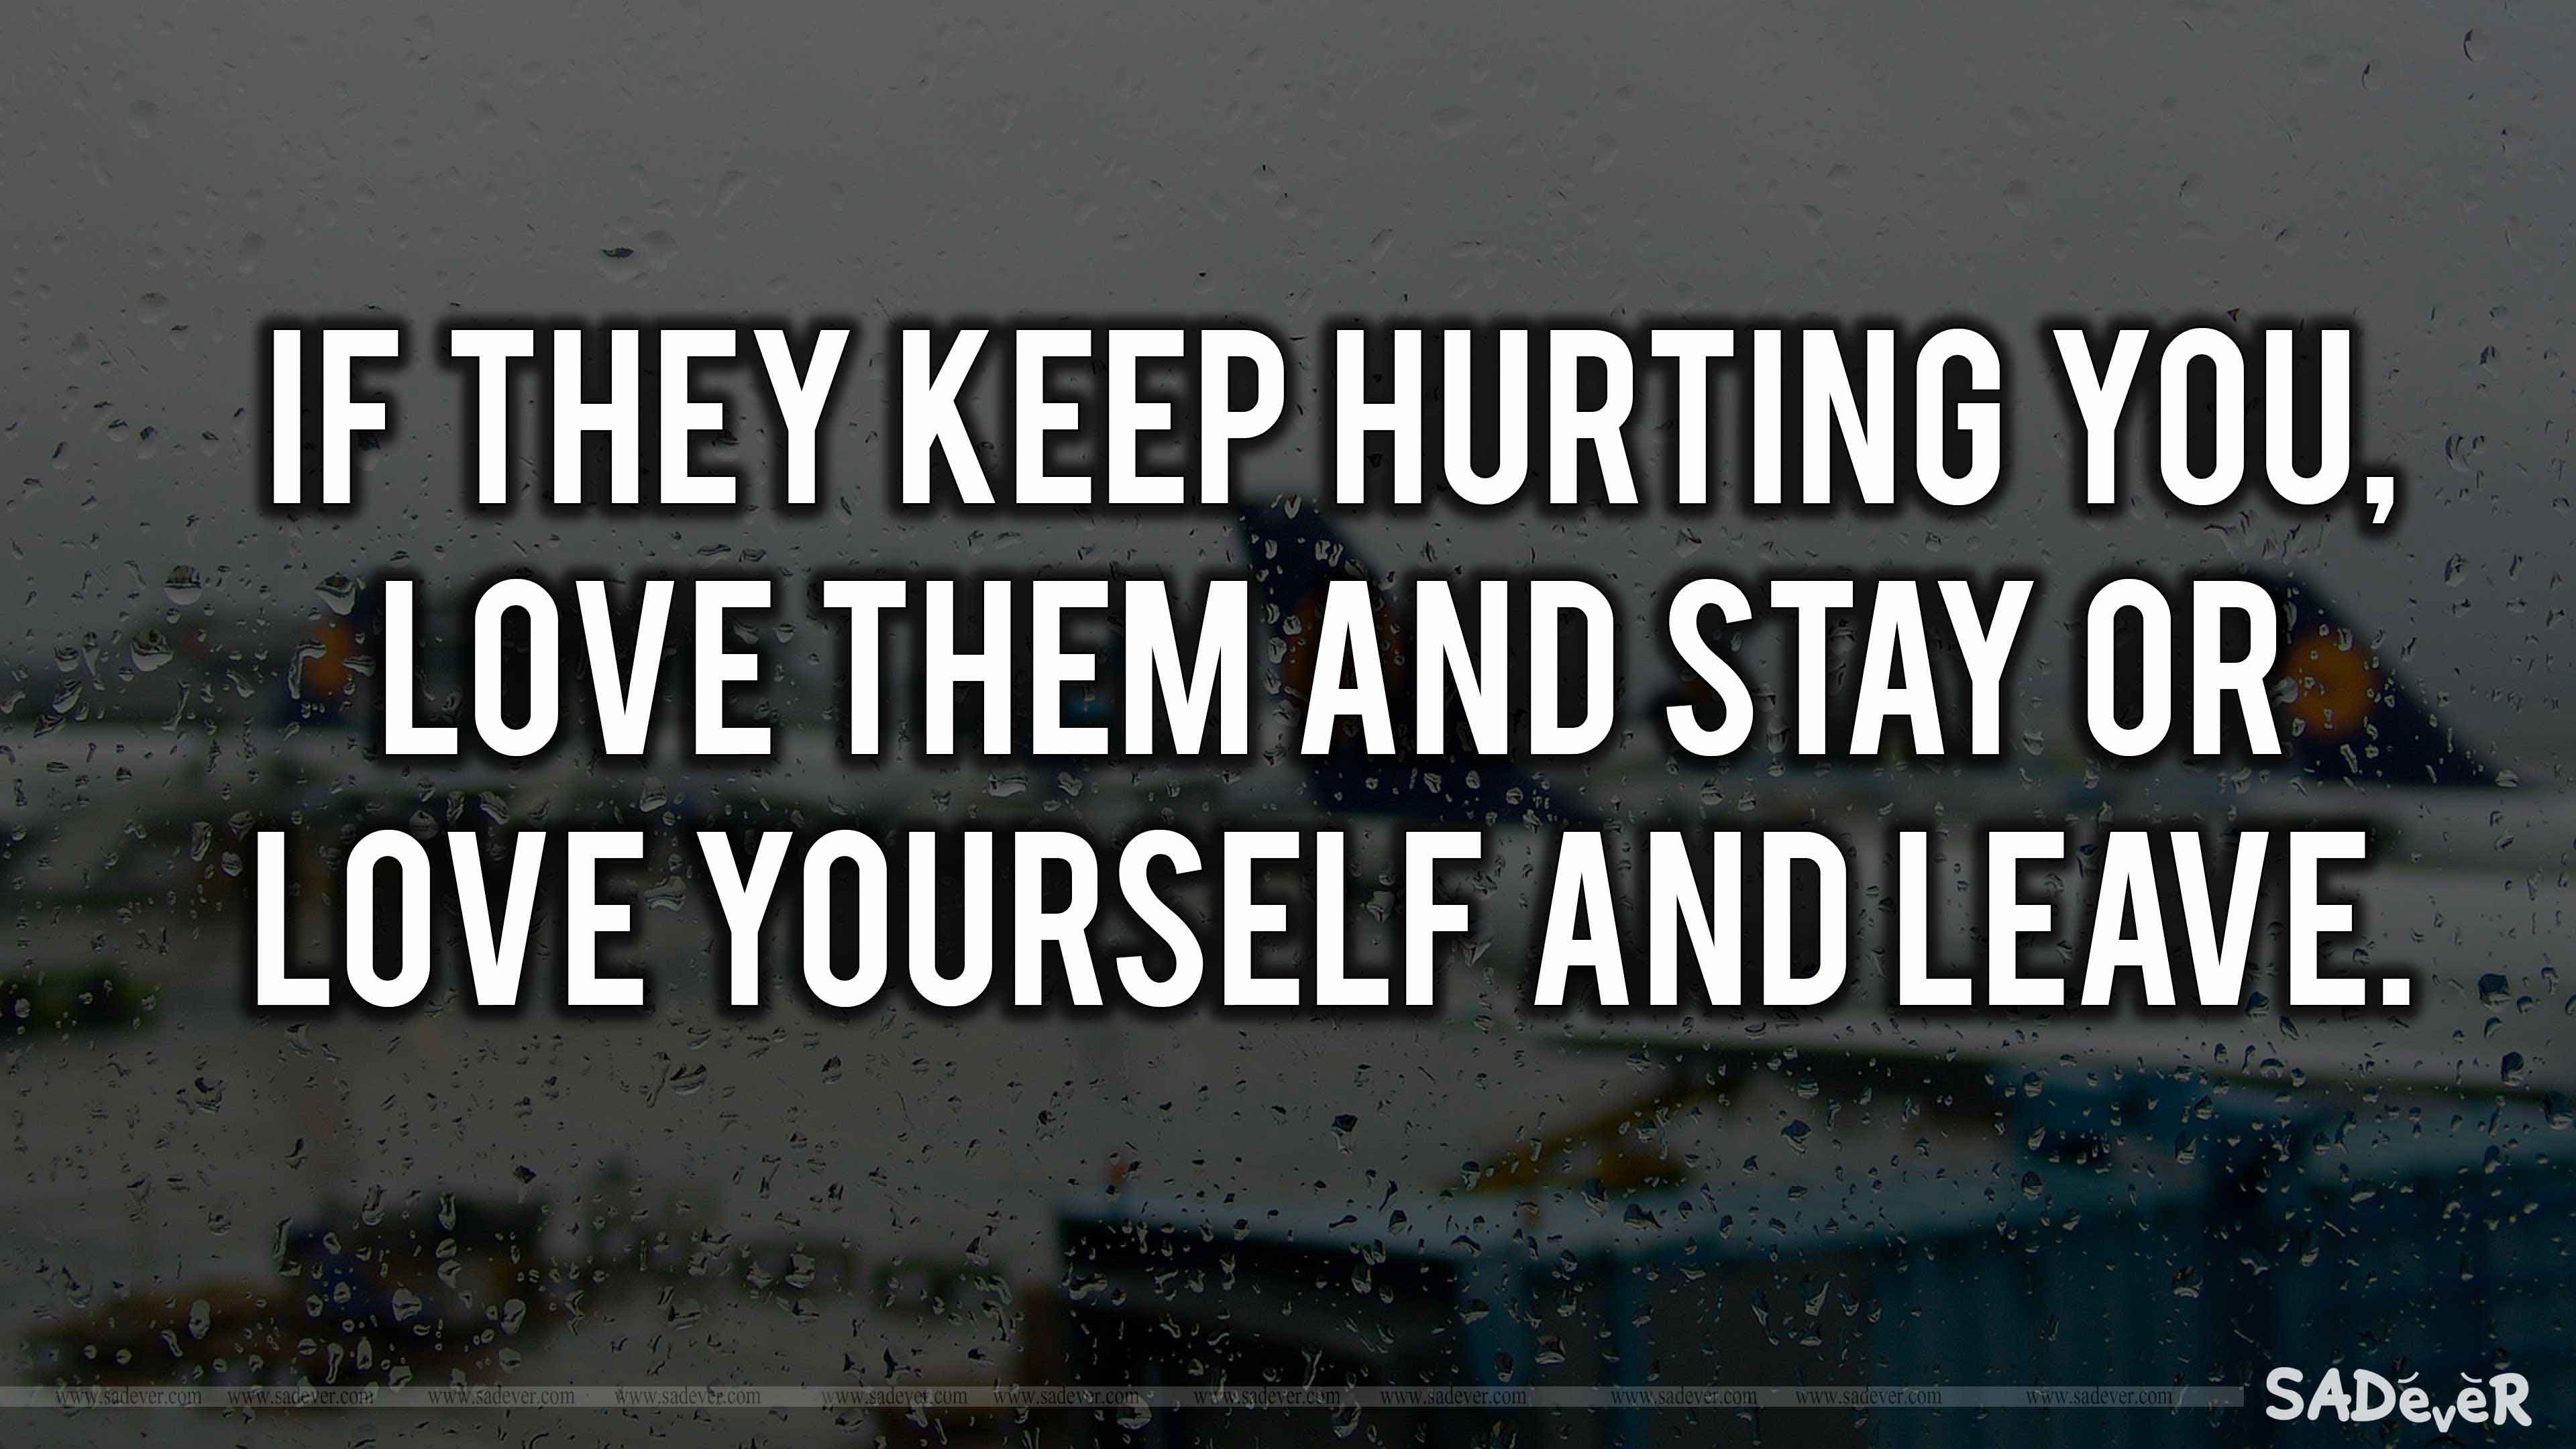 3840x2160 ... Love Hurts Quotes And Sayings For Her Love Hurts Images With Quotes –  Wallpaper ...